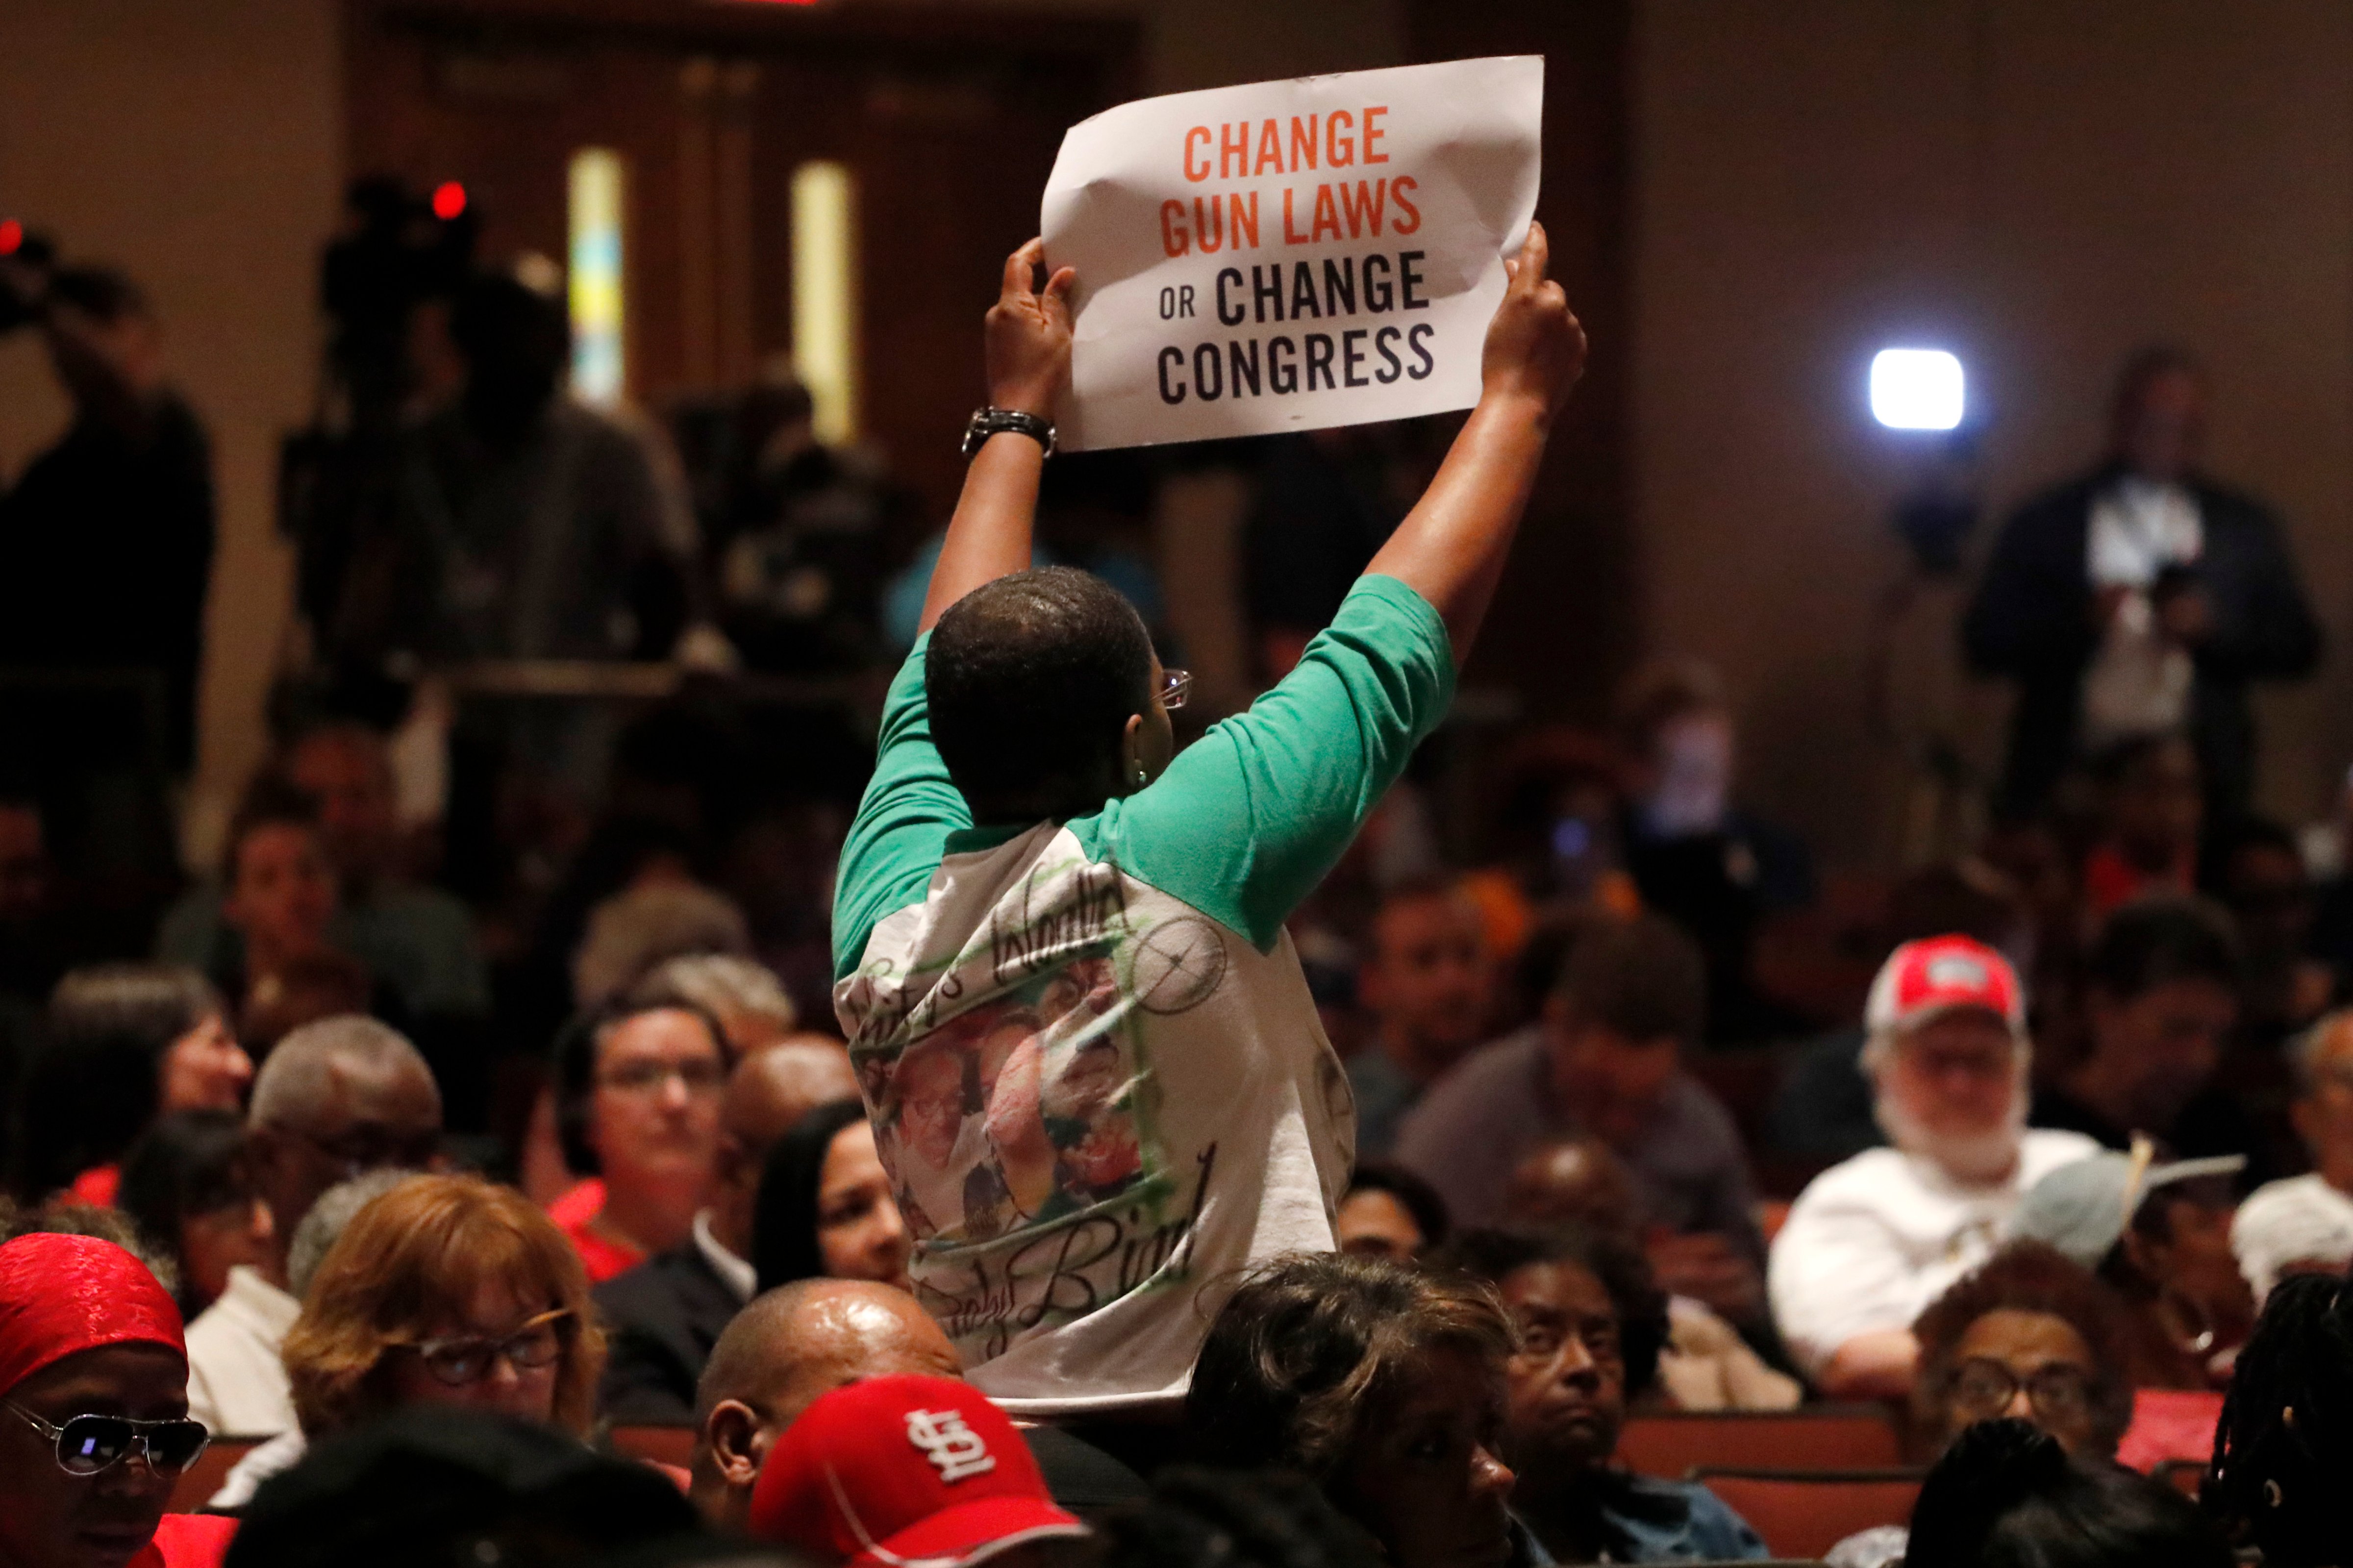 In this Wednesday, Aug. 28, 2019 photo, Erica Jones holds up a sign during a town hall to discuss the epidemic of gun violence and shocking number of children killed this summer in St. Louis. Jones, whose adult daughter was shot and killed in 2015, is like many parents desperately seeking a way to curb the gun violence that has killed at least a dozen children in the high-crime city already this year. (AP Photo/Jeff Roberson) (Jeff Roberson&mdash;AP)